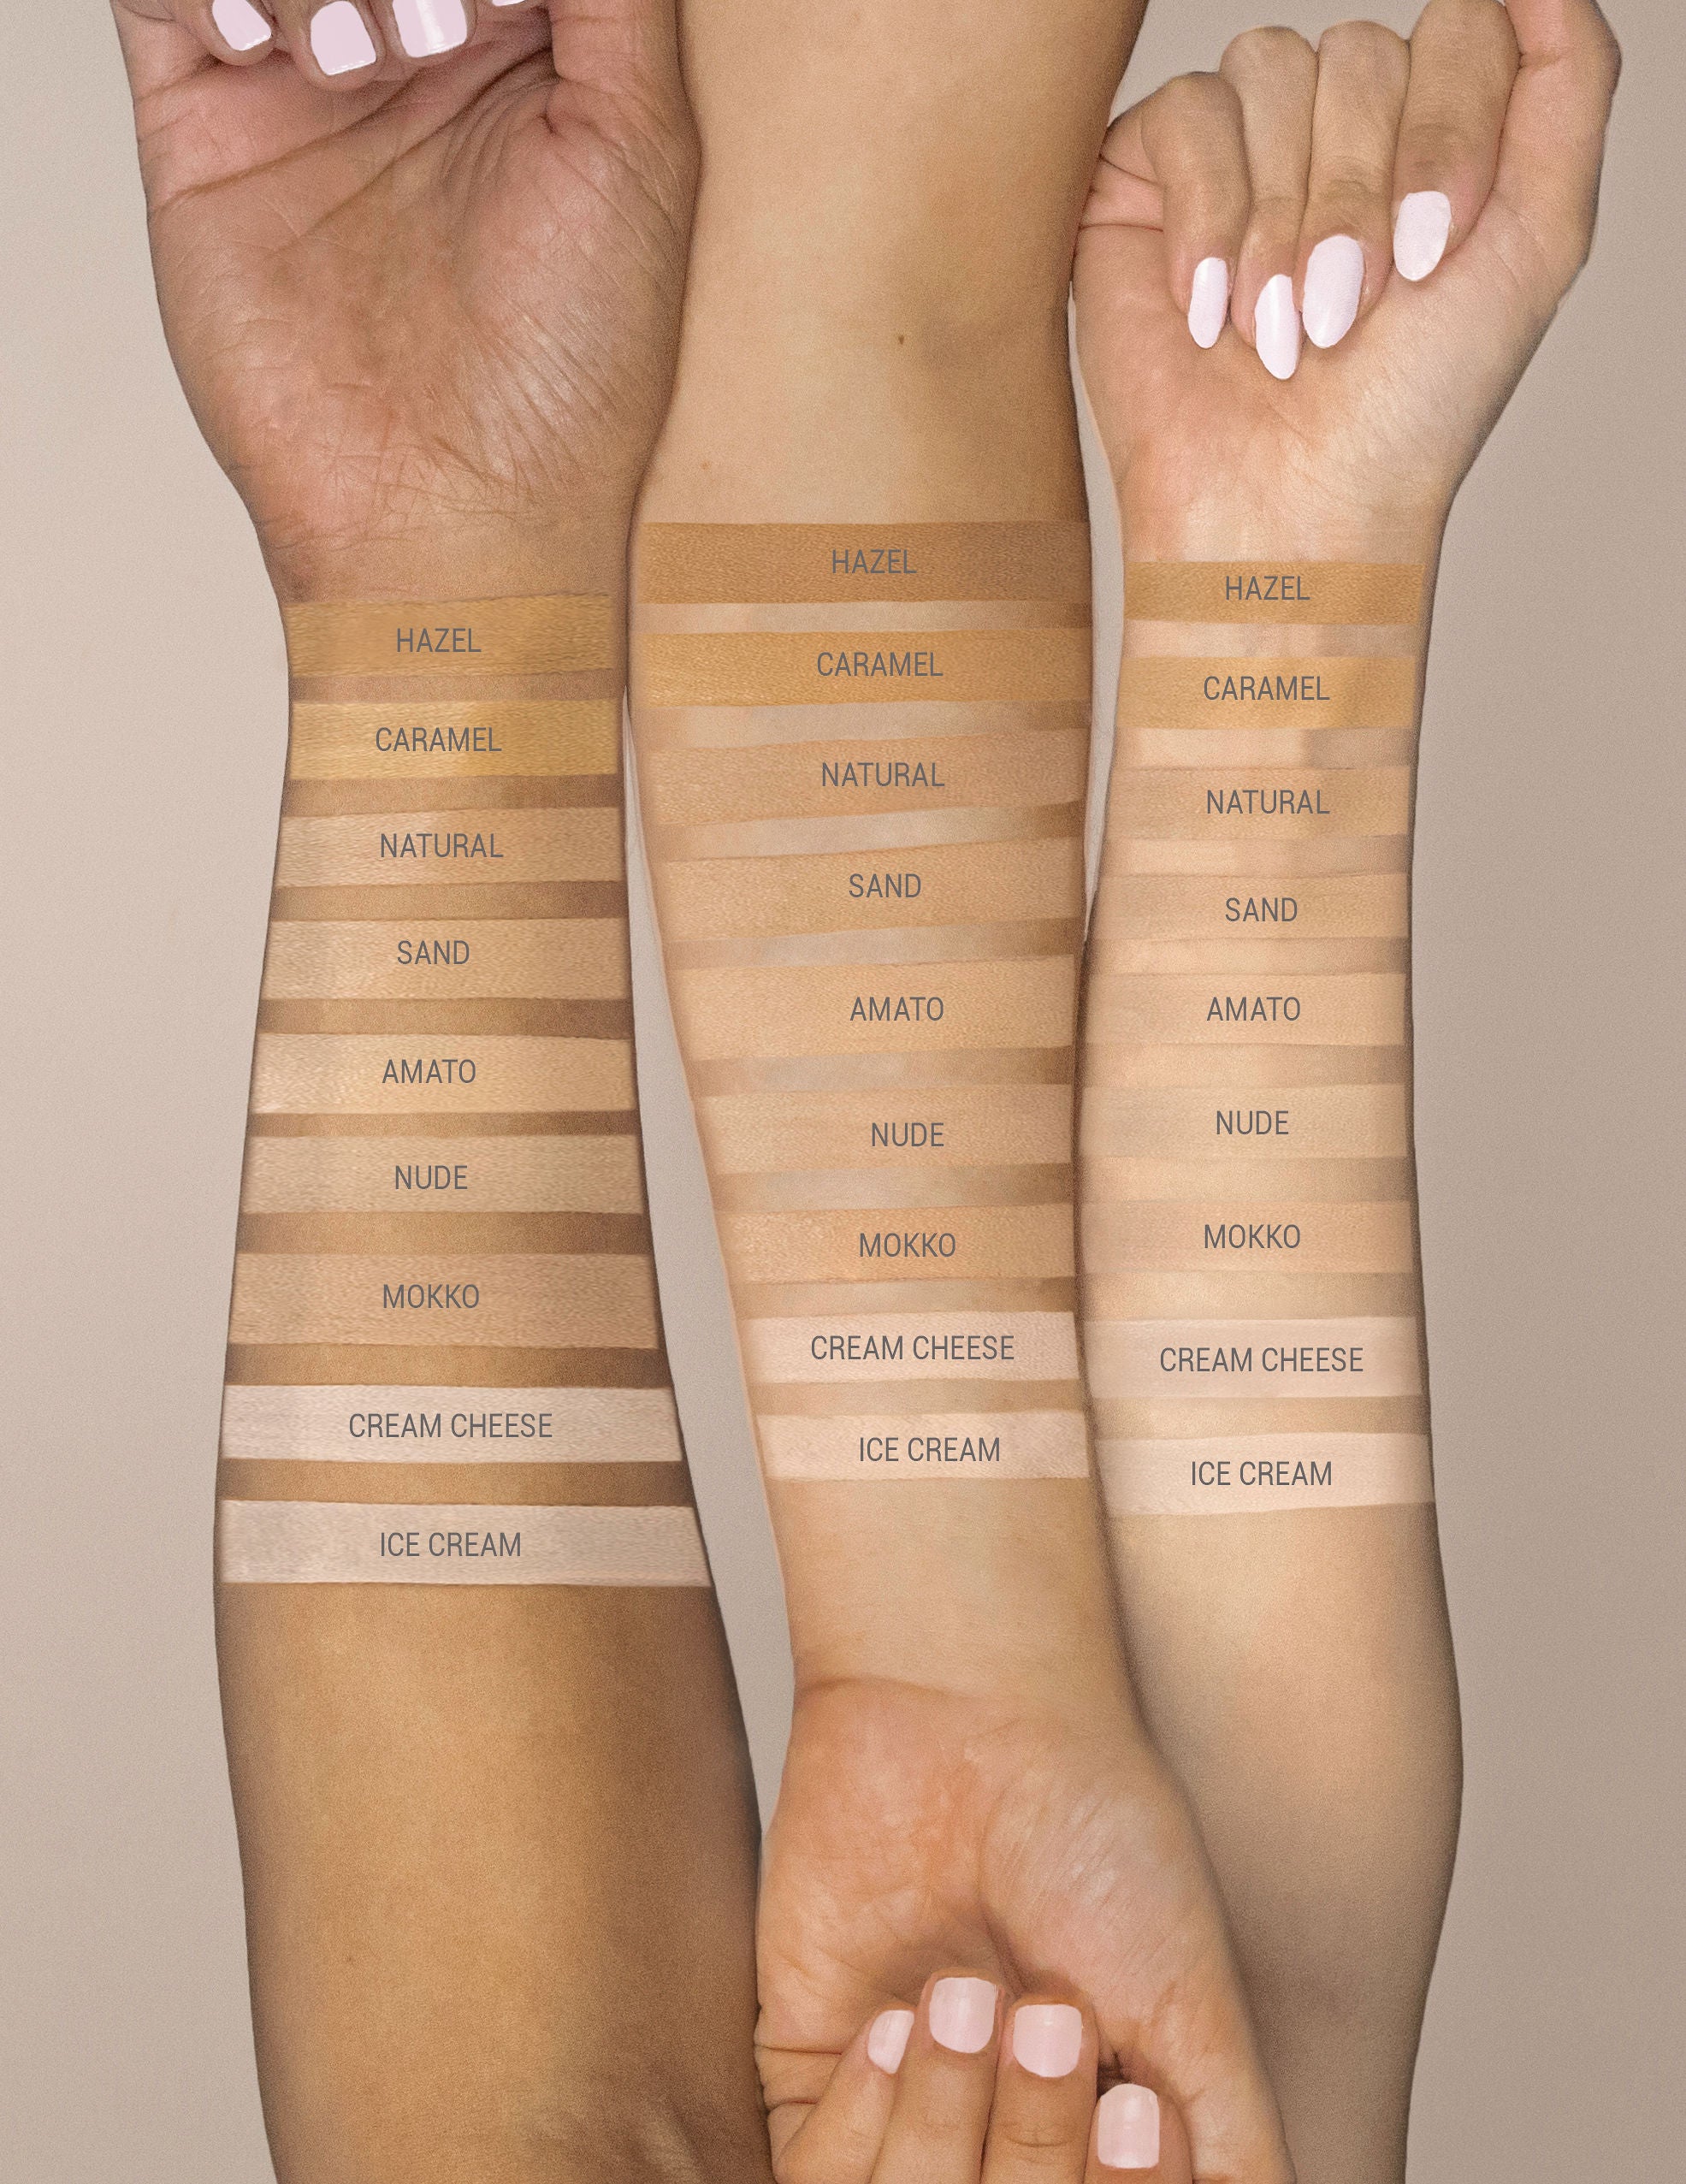 VEGAN Pro Soft Matte Longwear Full Coverage Liquid Foundation by Beauty by Narina "Natural"